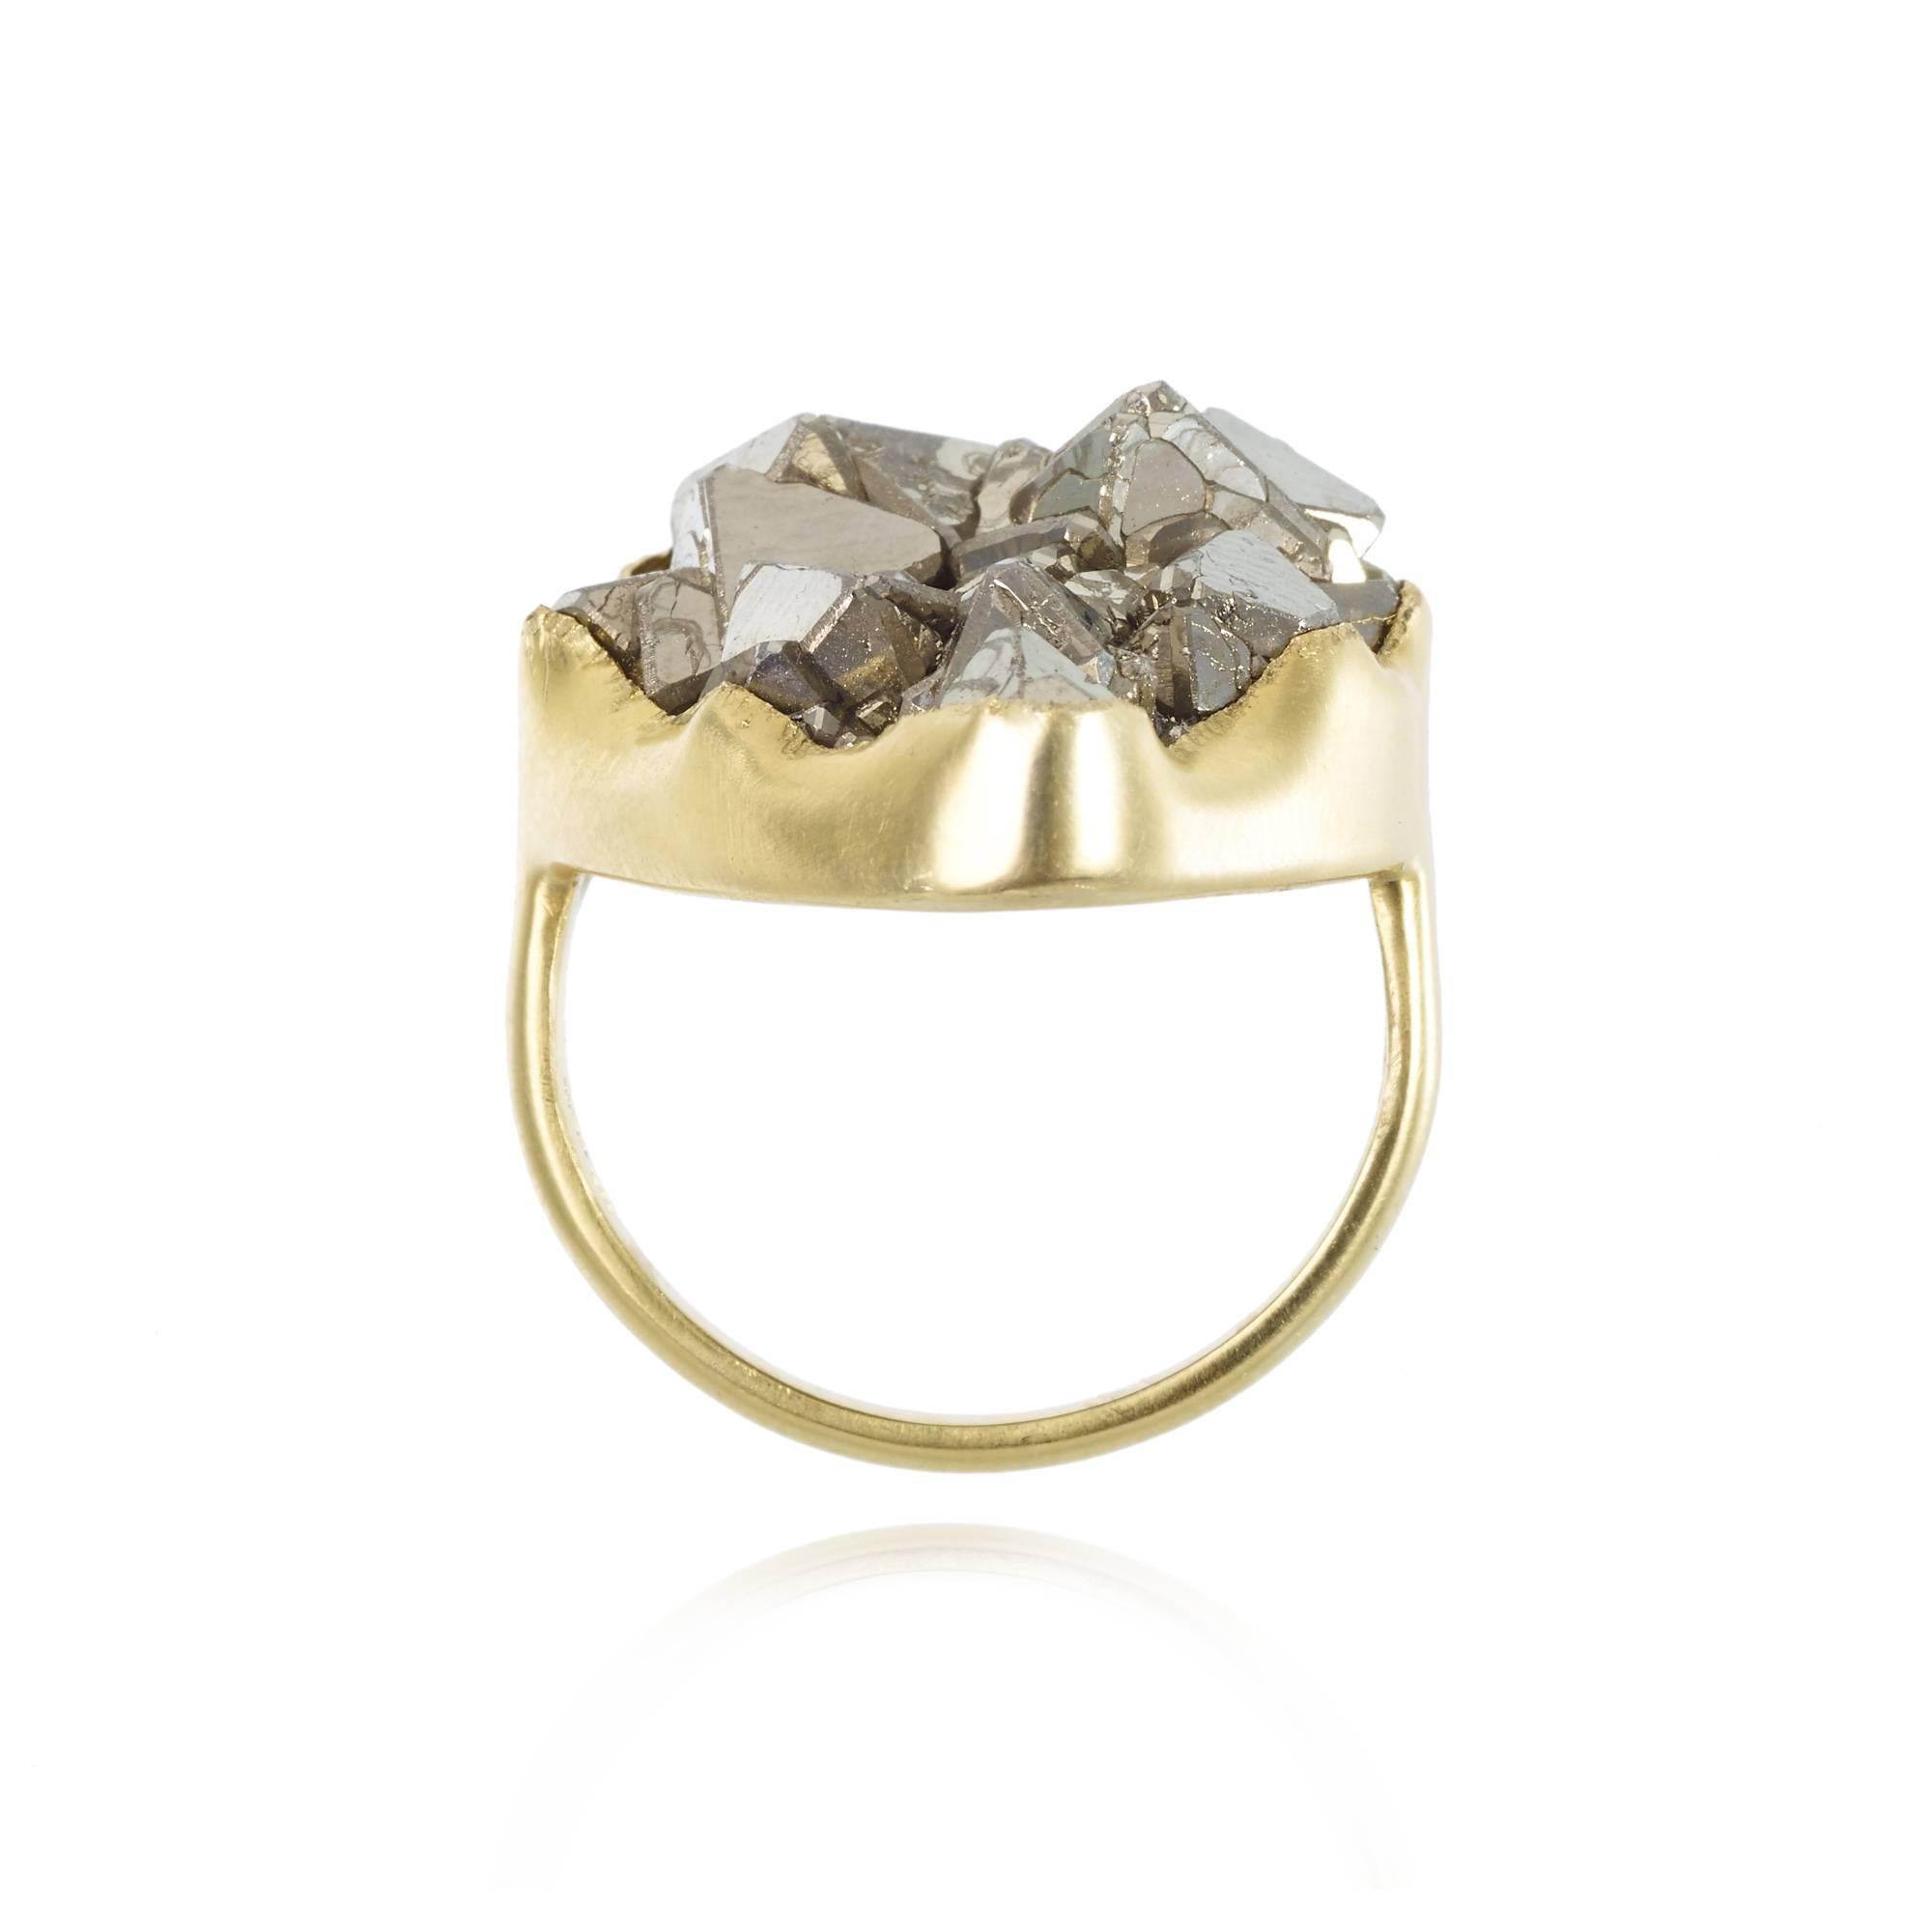 The 18kt Gold Greek ring, inspired by the simplicity of ancient Greek Gold work, Is a classic Pippa Small design. The Gold setting is discrete allowing the beautiful Pyrite stone to shine. 